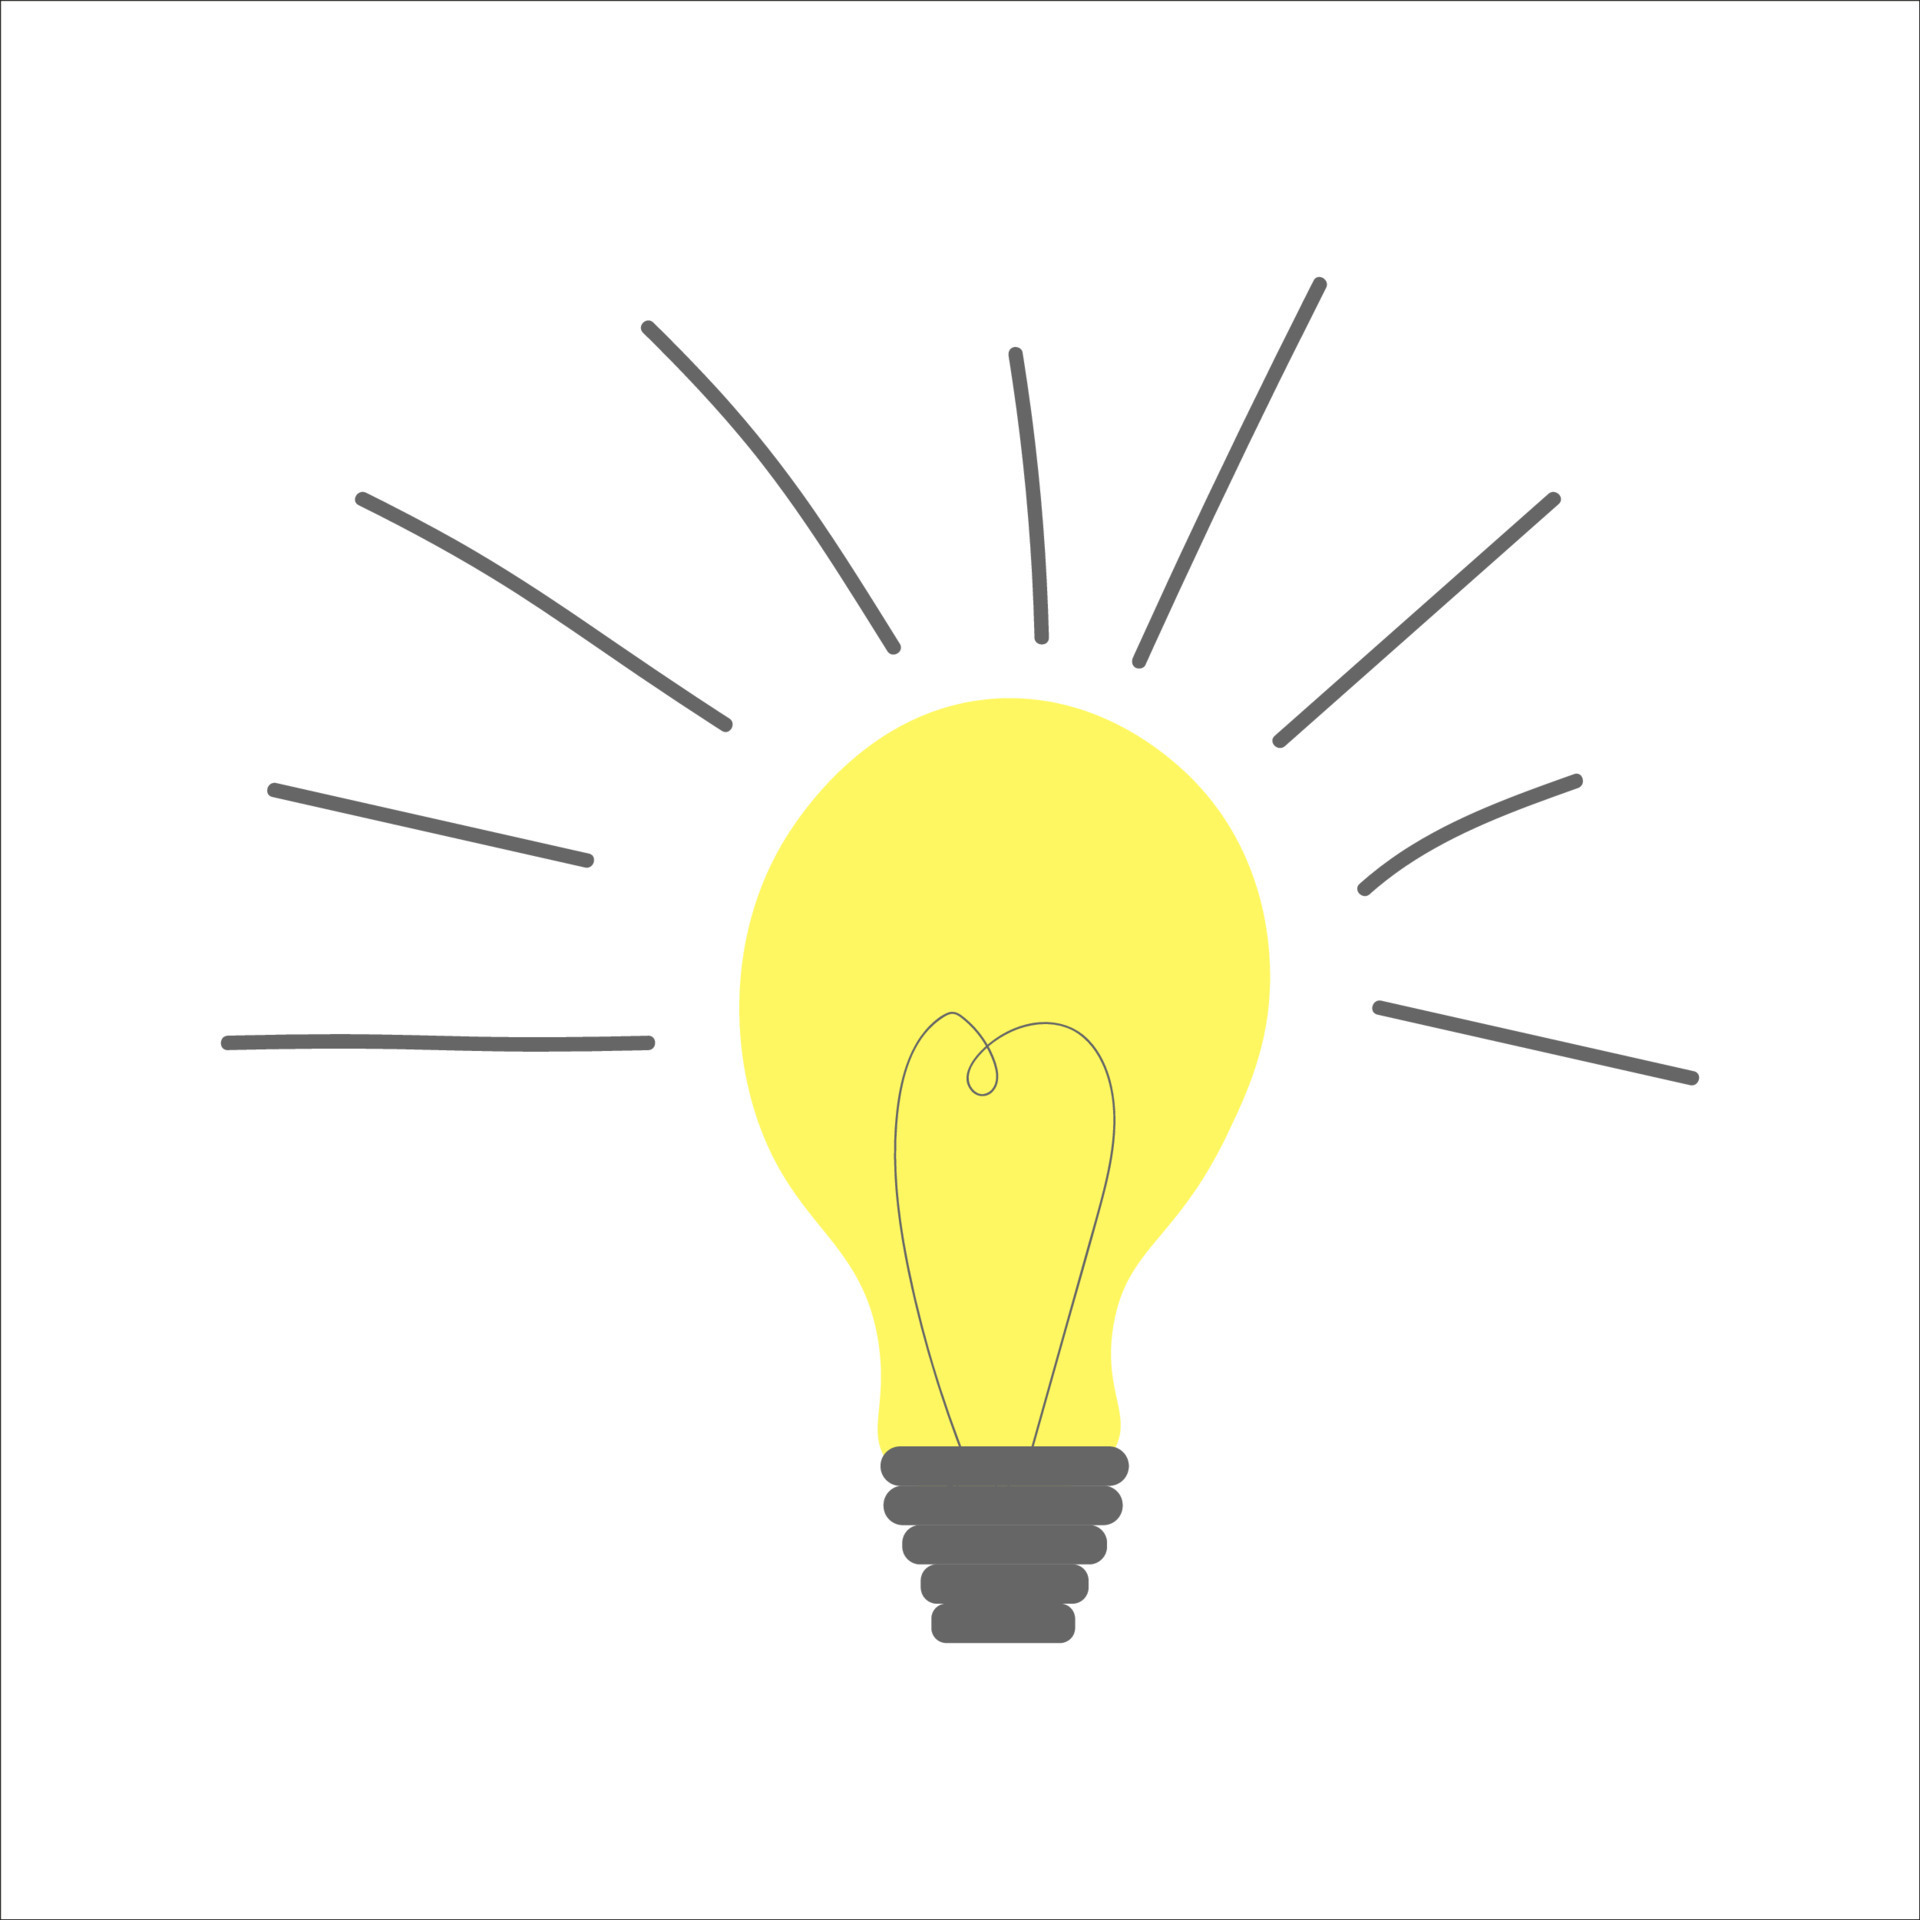 https://static.vecteezy.com/system/resources/previews/008/213/606/original/minimalistic-illustration-of-a-light-bulb-lit-up-an-idea-came-up-idea-symbol-sweetheart-free-vector.jpg